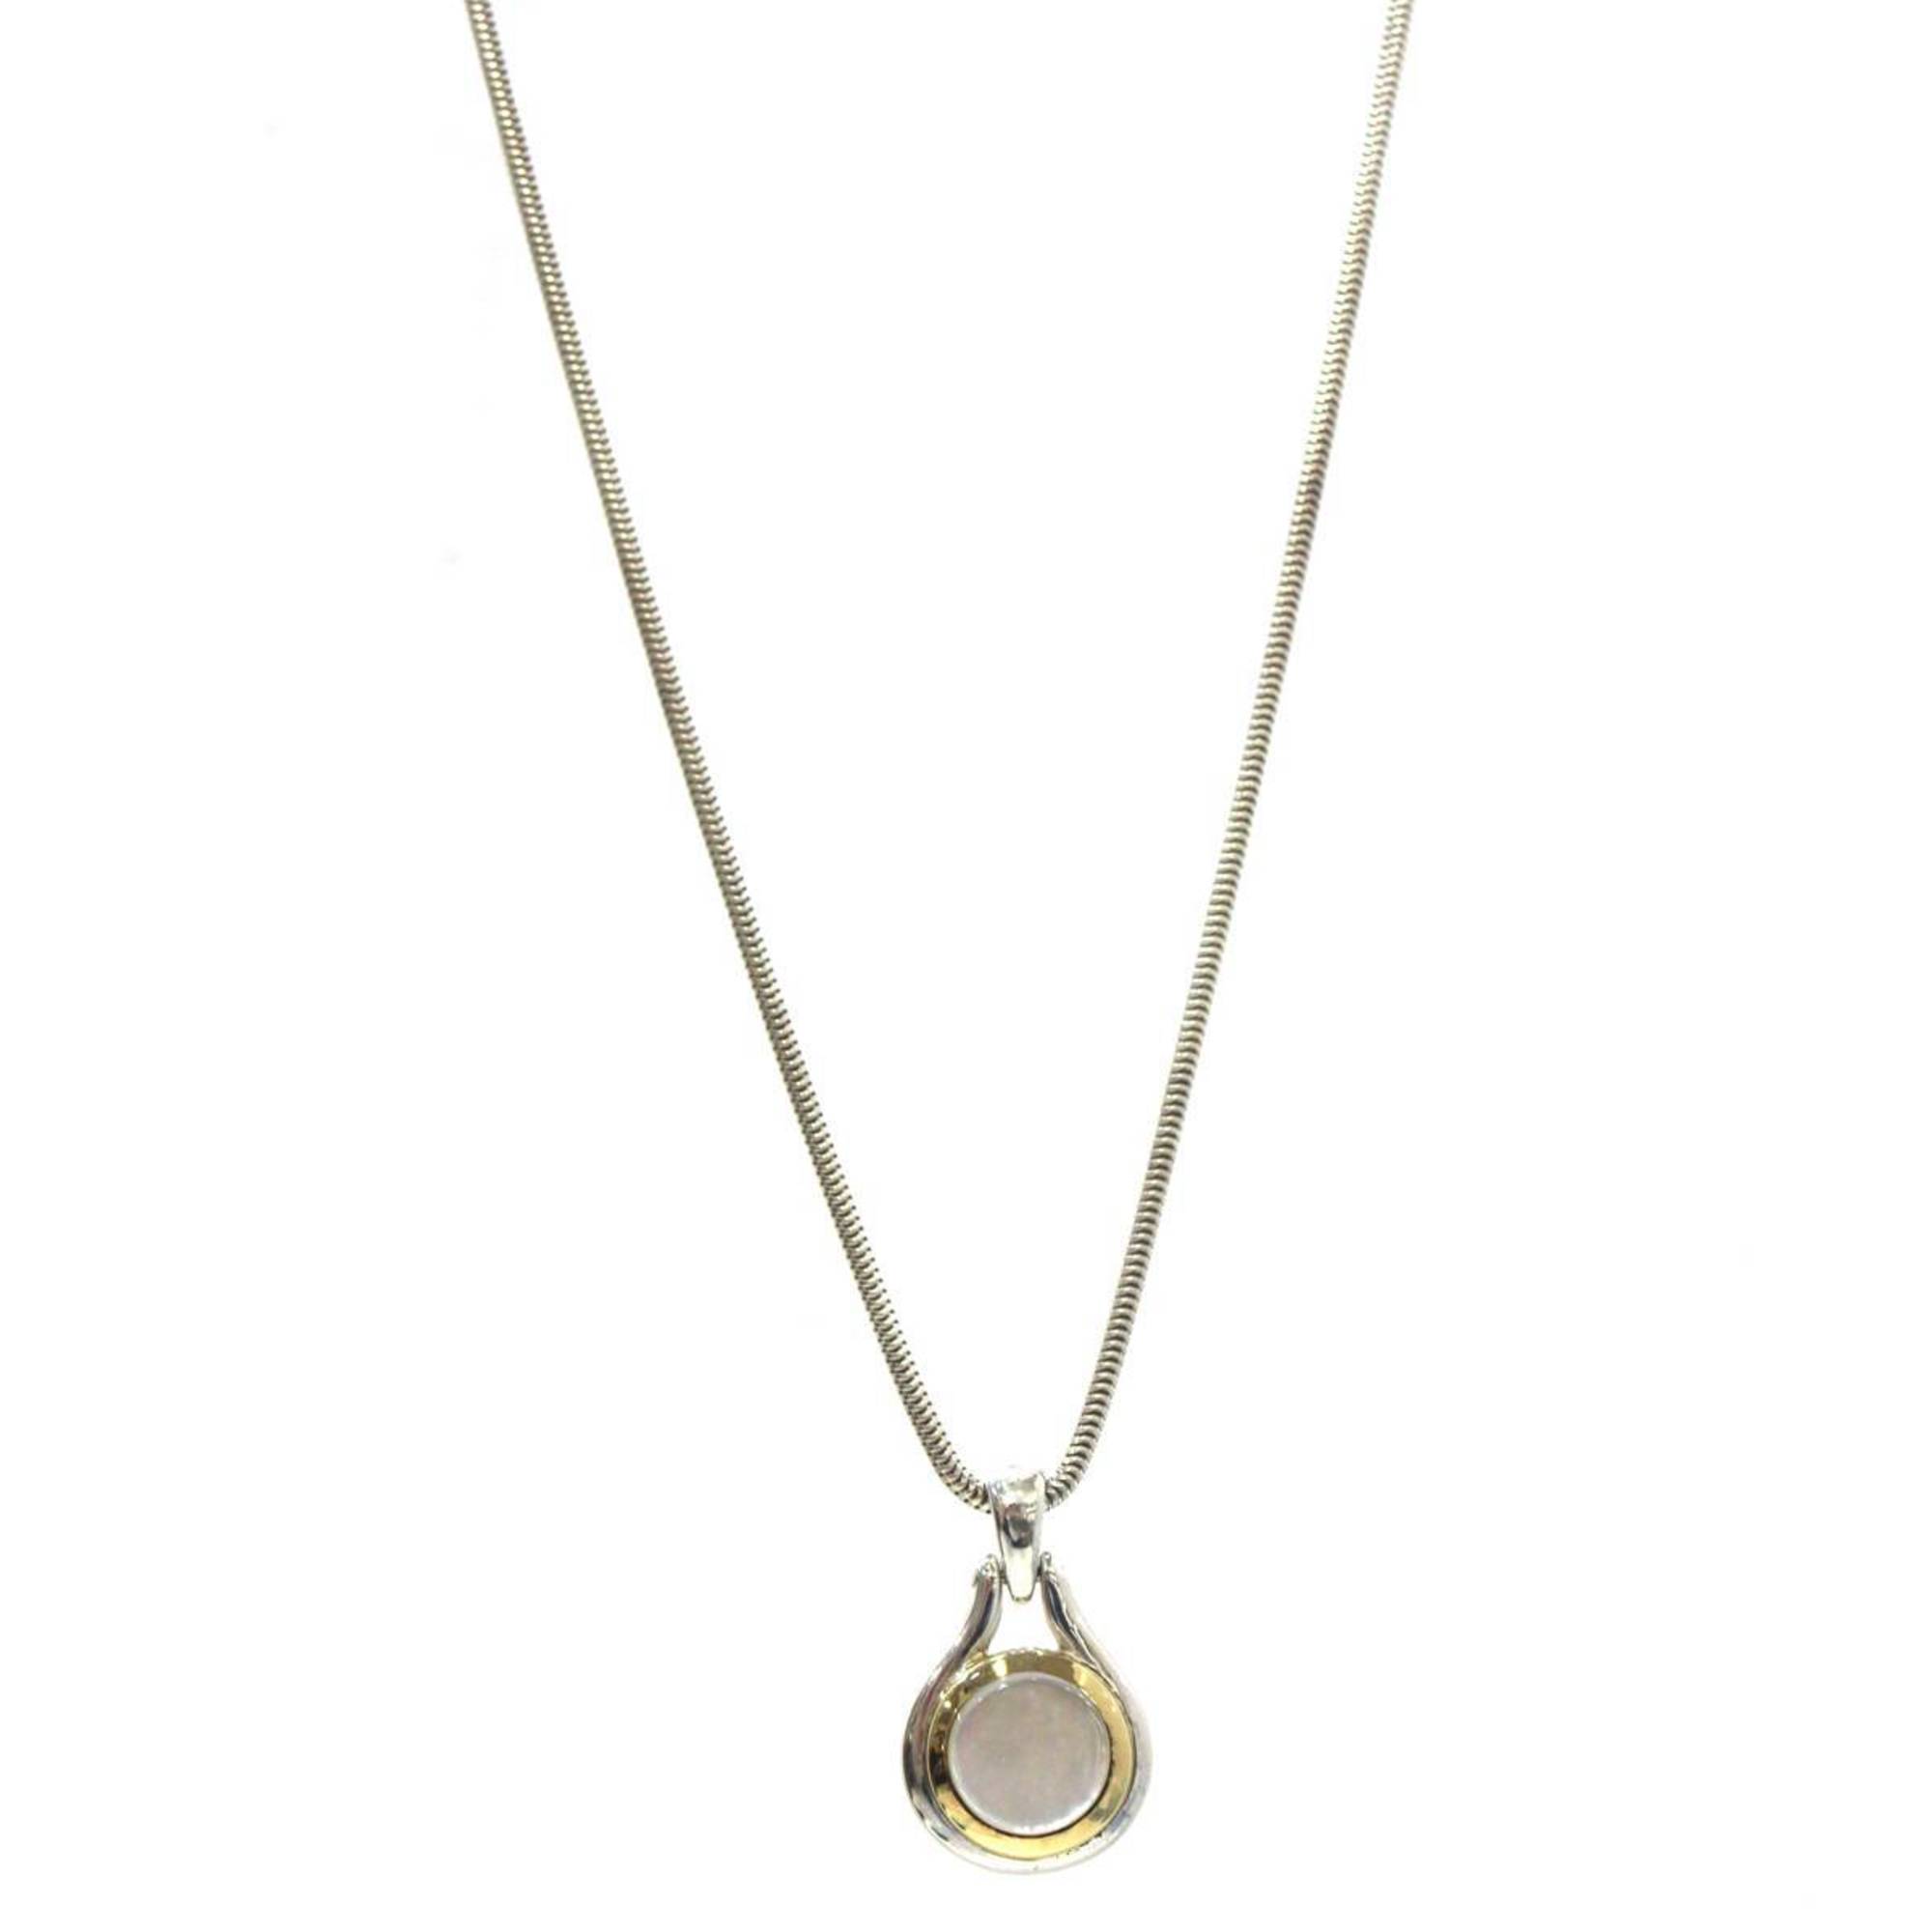 Tiffany & Co. 750 925 combination necklace K18 (engraved 750) SV925 Gold x Silver